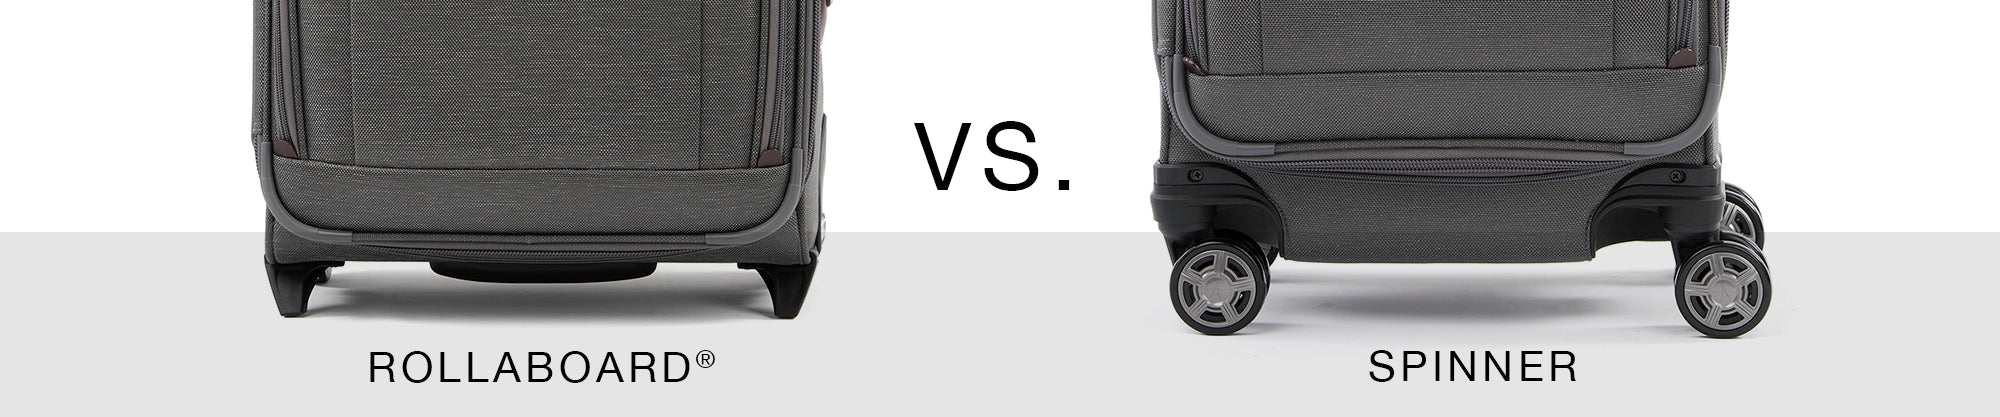 Rollaboard vs. Spinner Luggage comparison highlighting rollaboard suitcase next to spinner suitcase